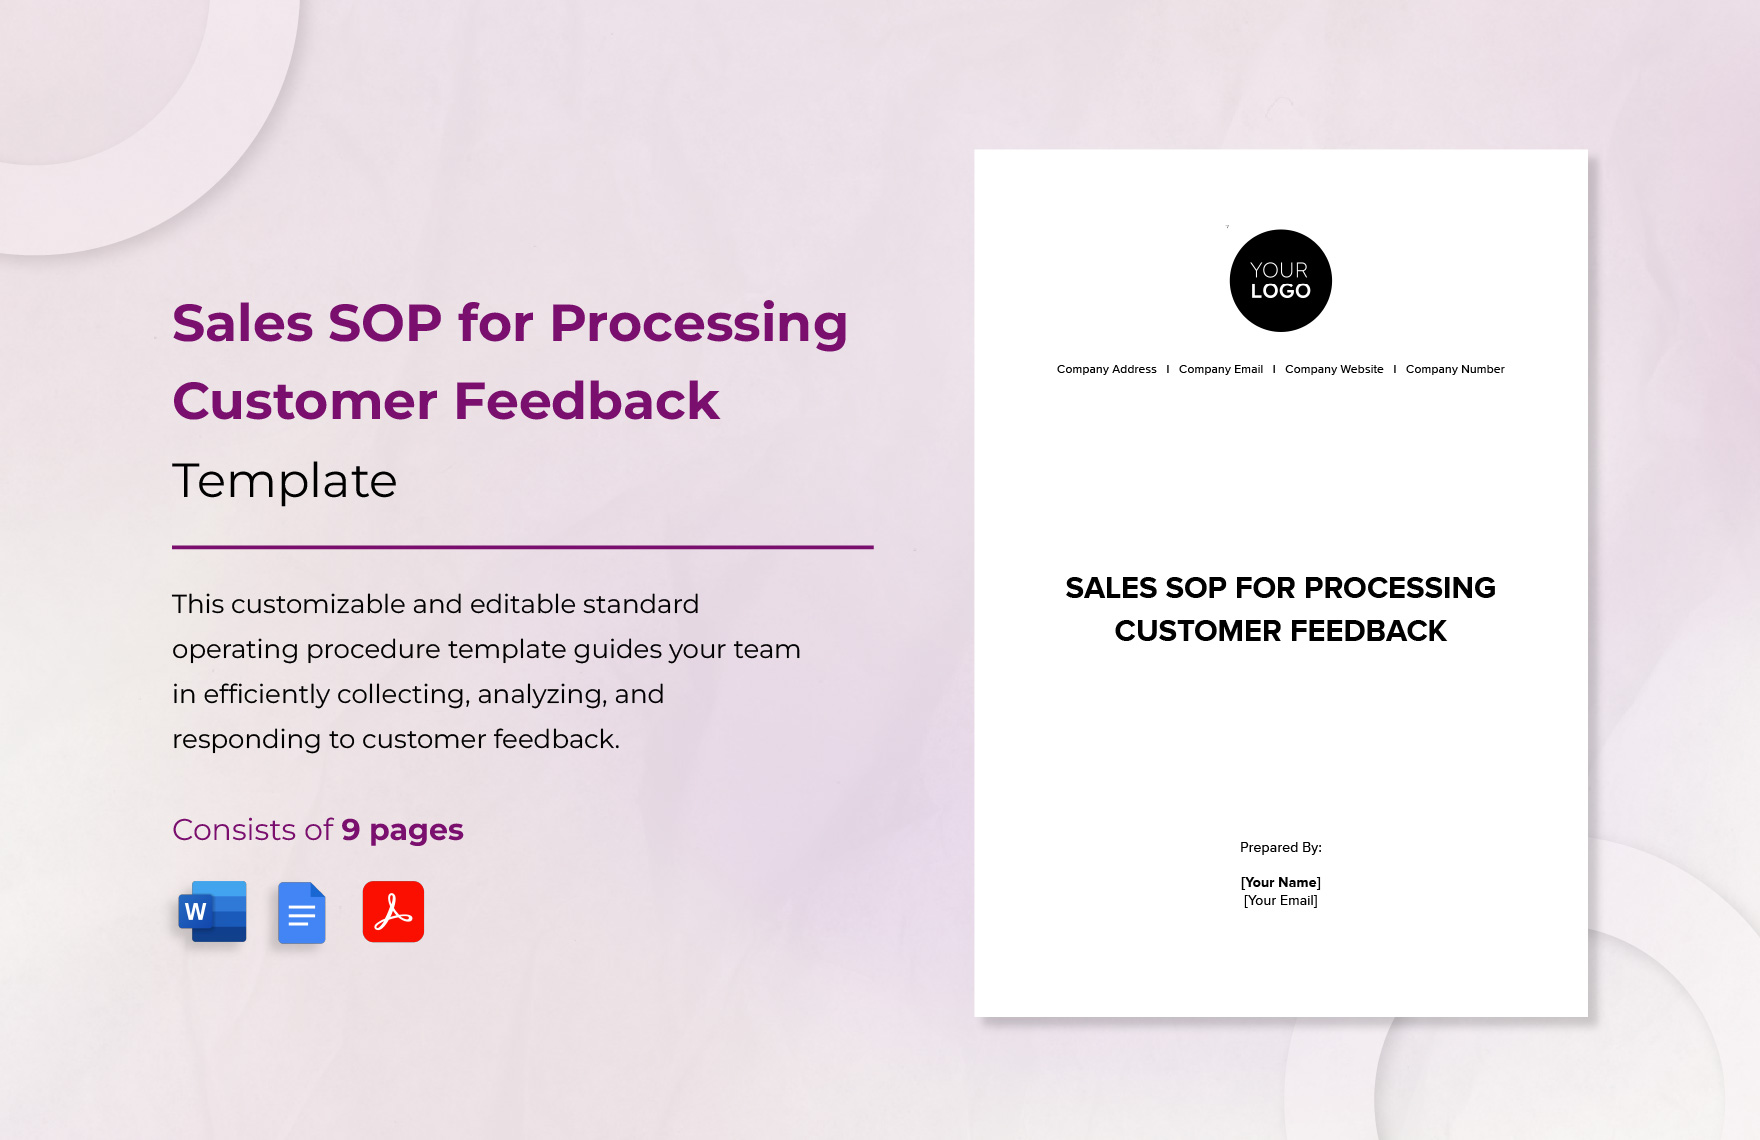 Sales SOP for Processing Customer Feedback Template